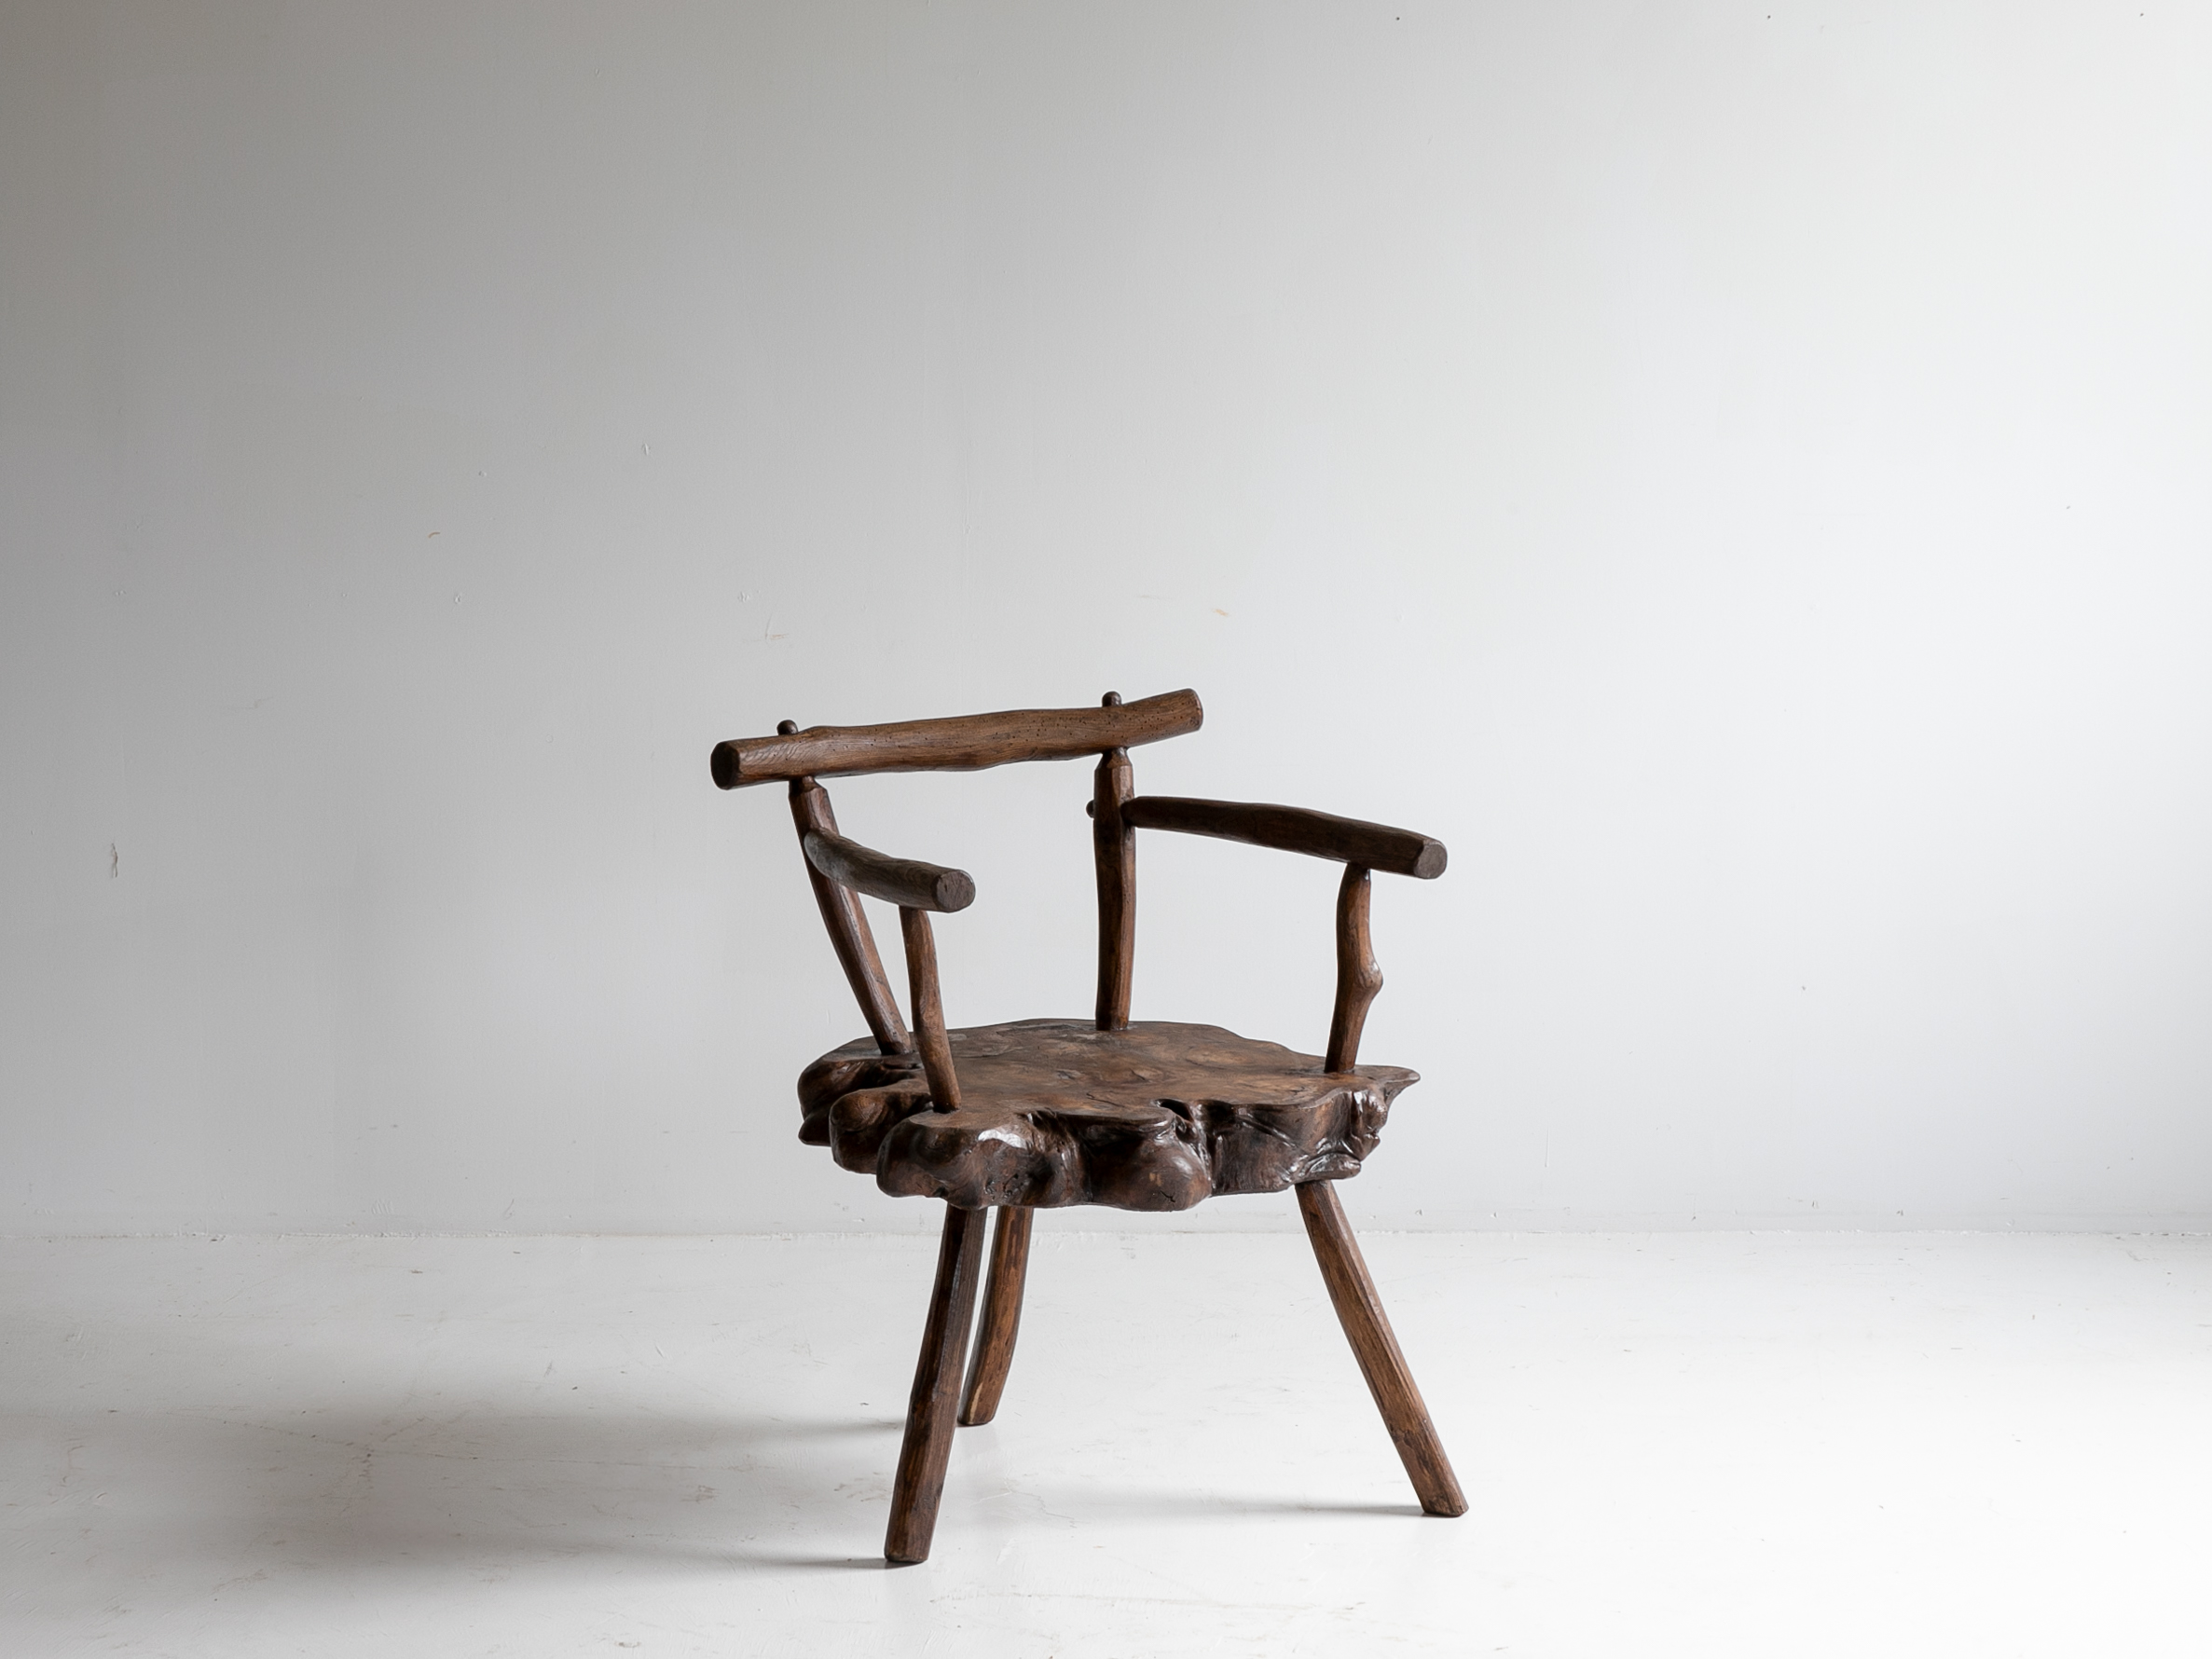 Wooden primitive tripod chair from France